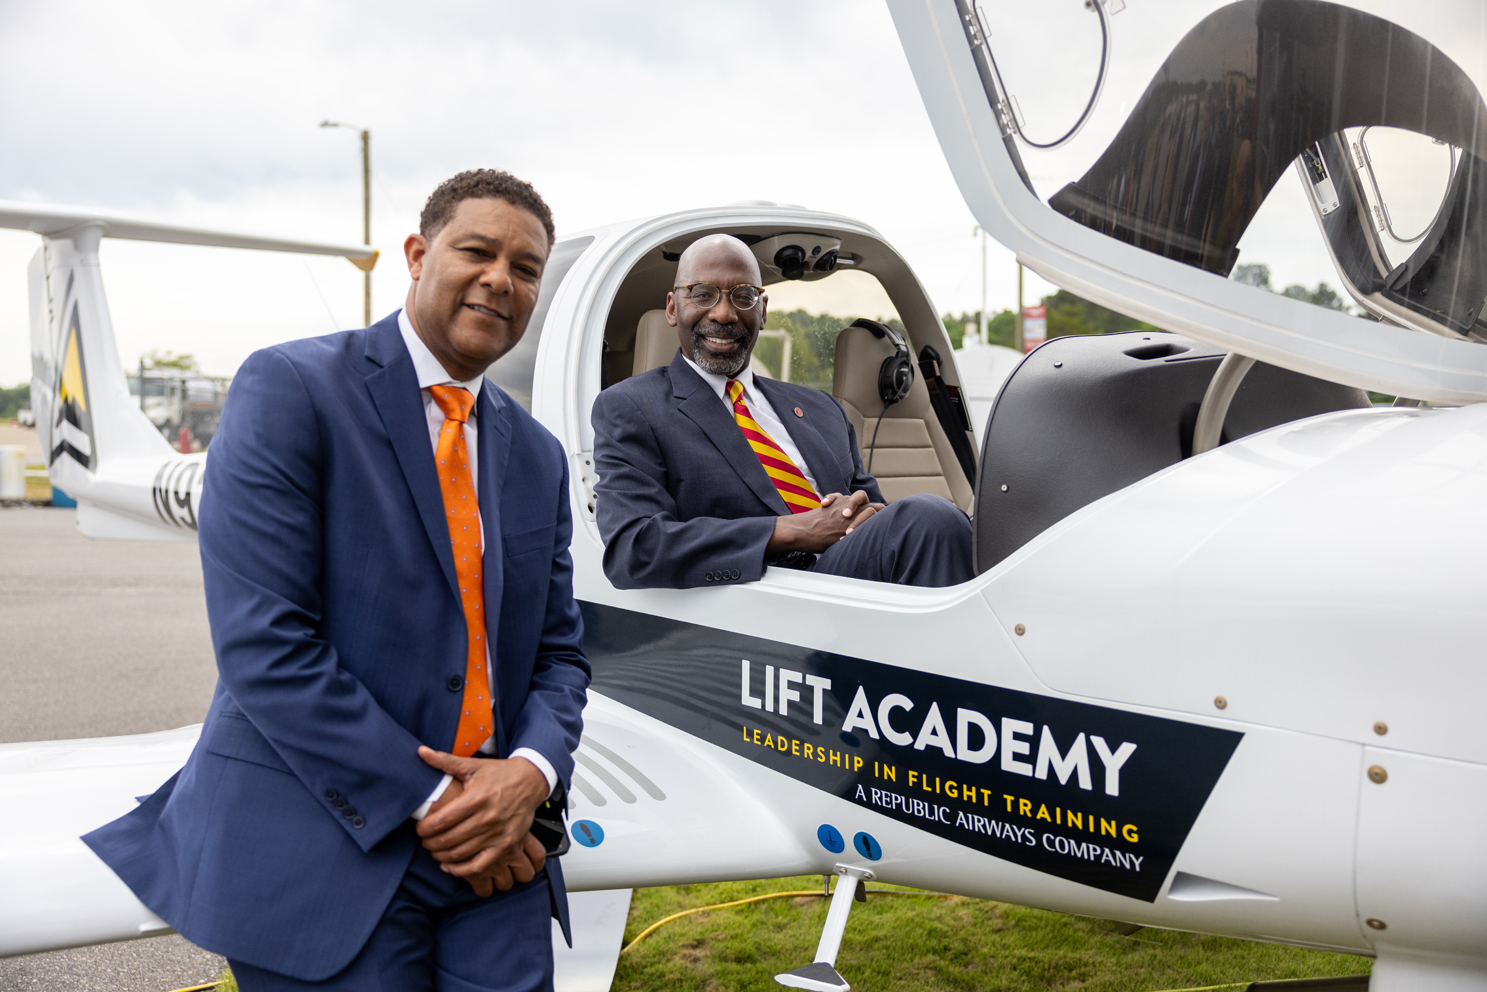 Provost S. Keith Hargrove tests the LIFT aircraft students will learn to fly, along with Darrel E. Morton, Sr. Manager Educational Programs and Diversity Partnerships, Republic Airways.